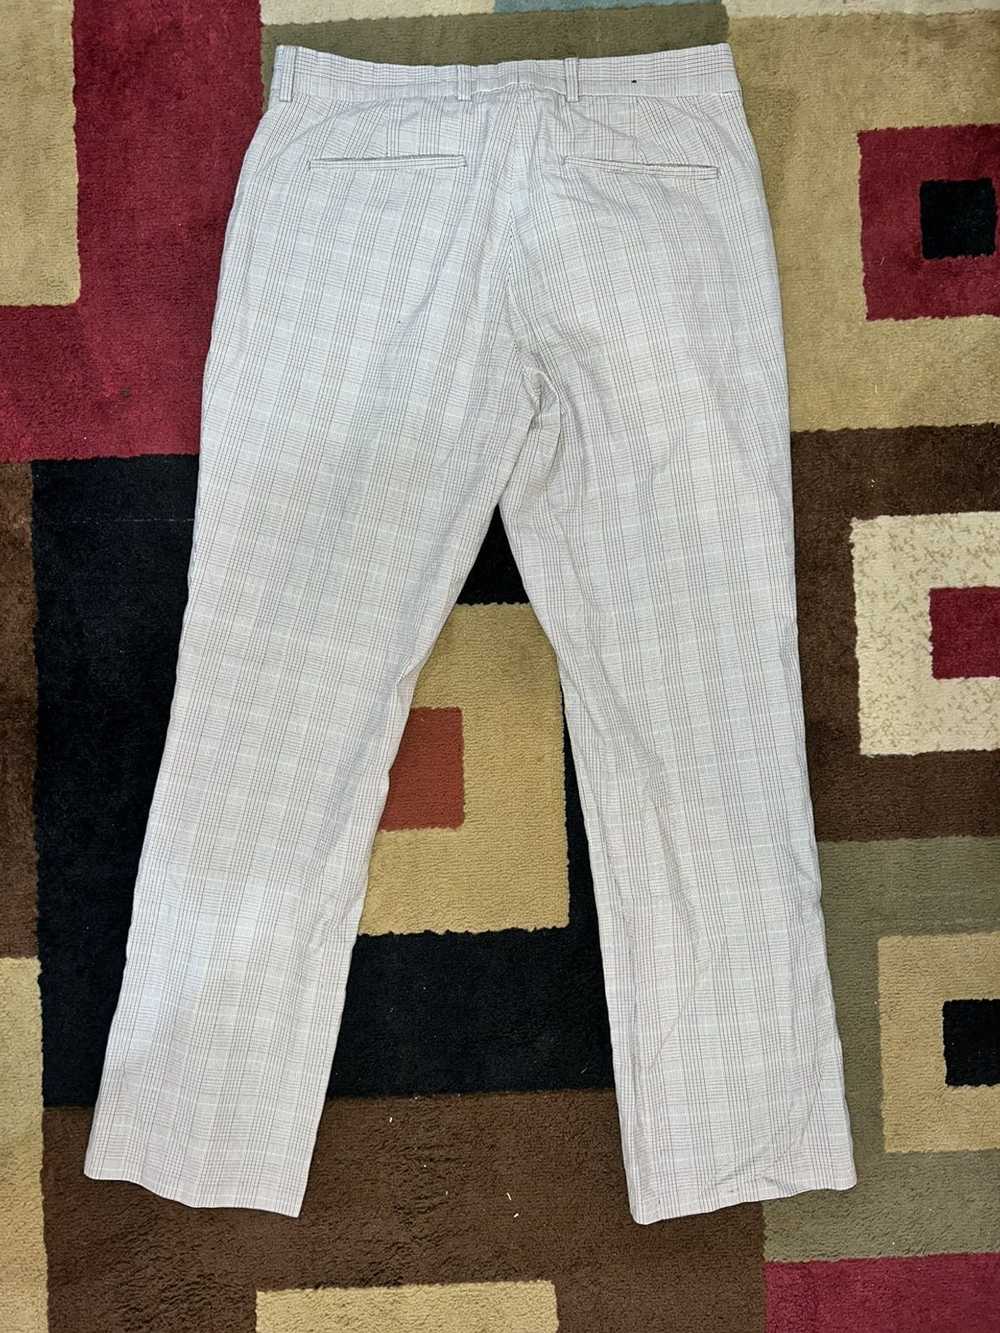 Express Vintage style plaid trousers - image 2